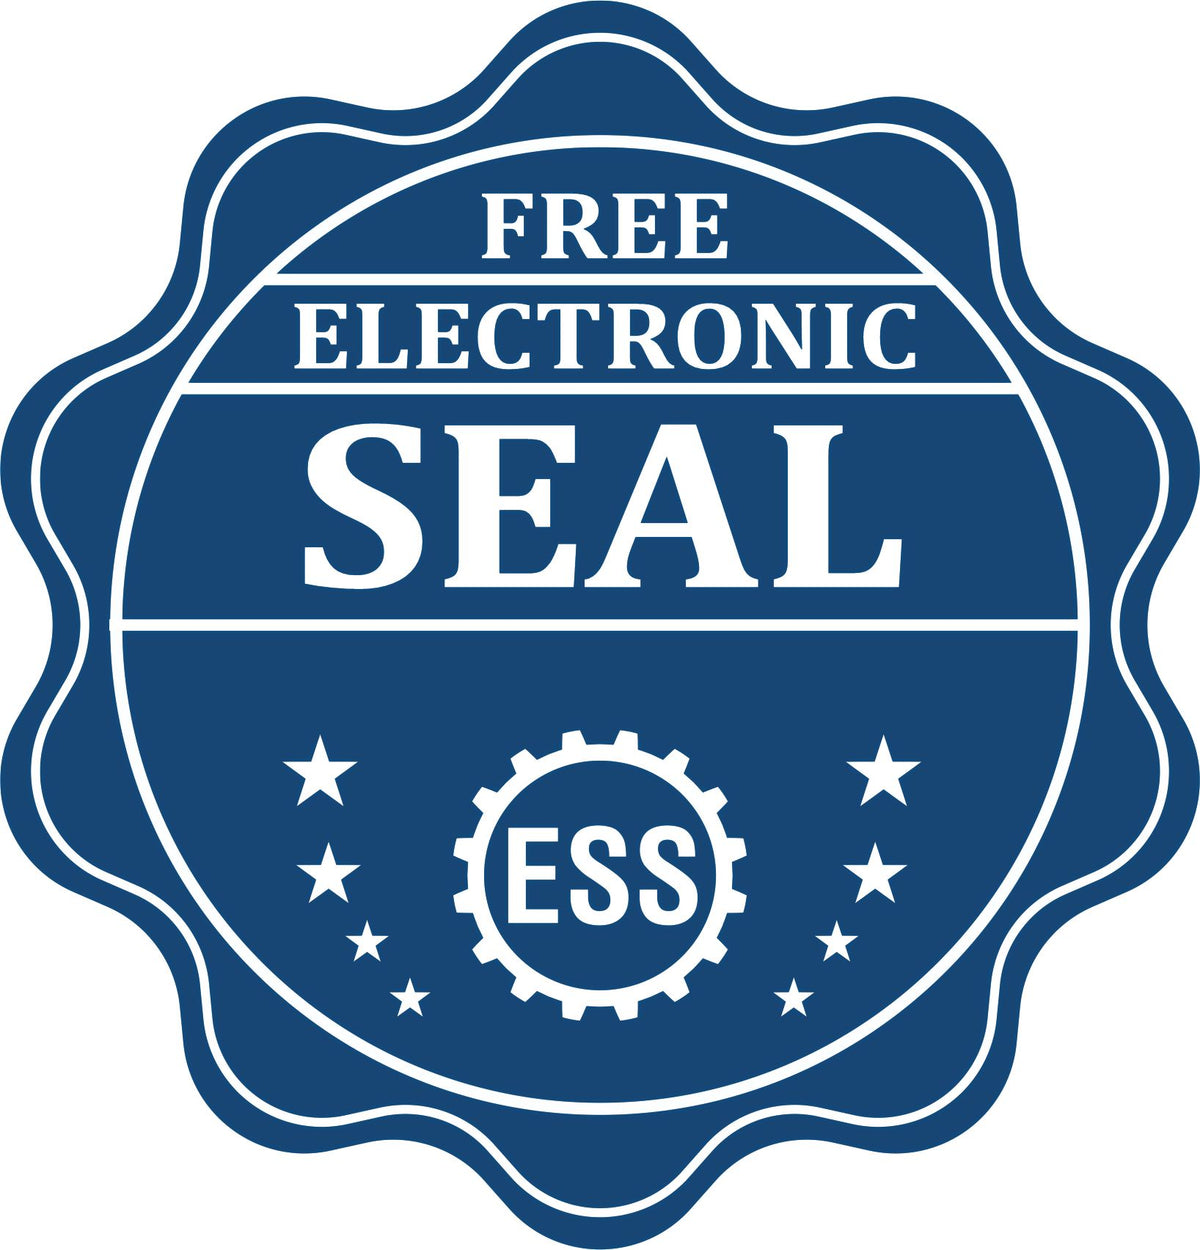 A badge showing a free electronic seal for the State of Missouri Long Reach Architectural Embossing Seal with stars and the ESS gear on the emblem.